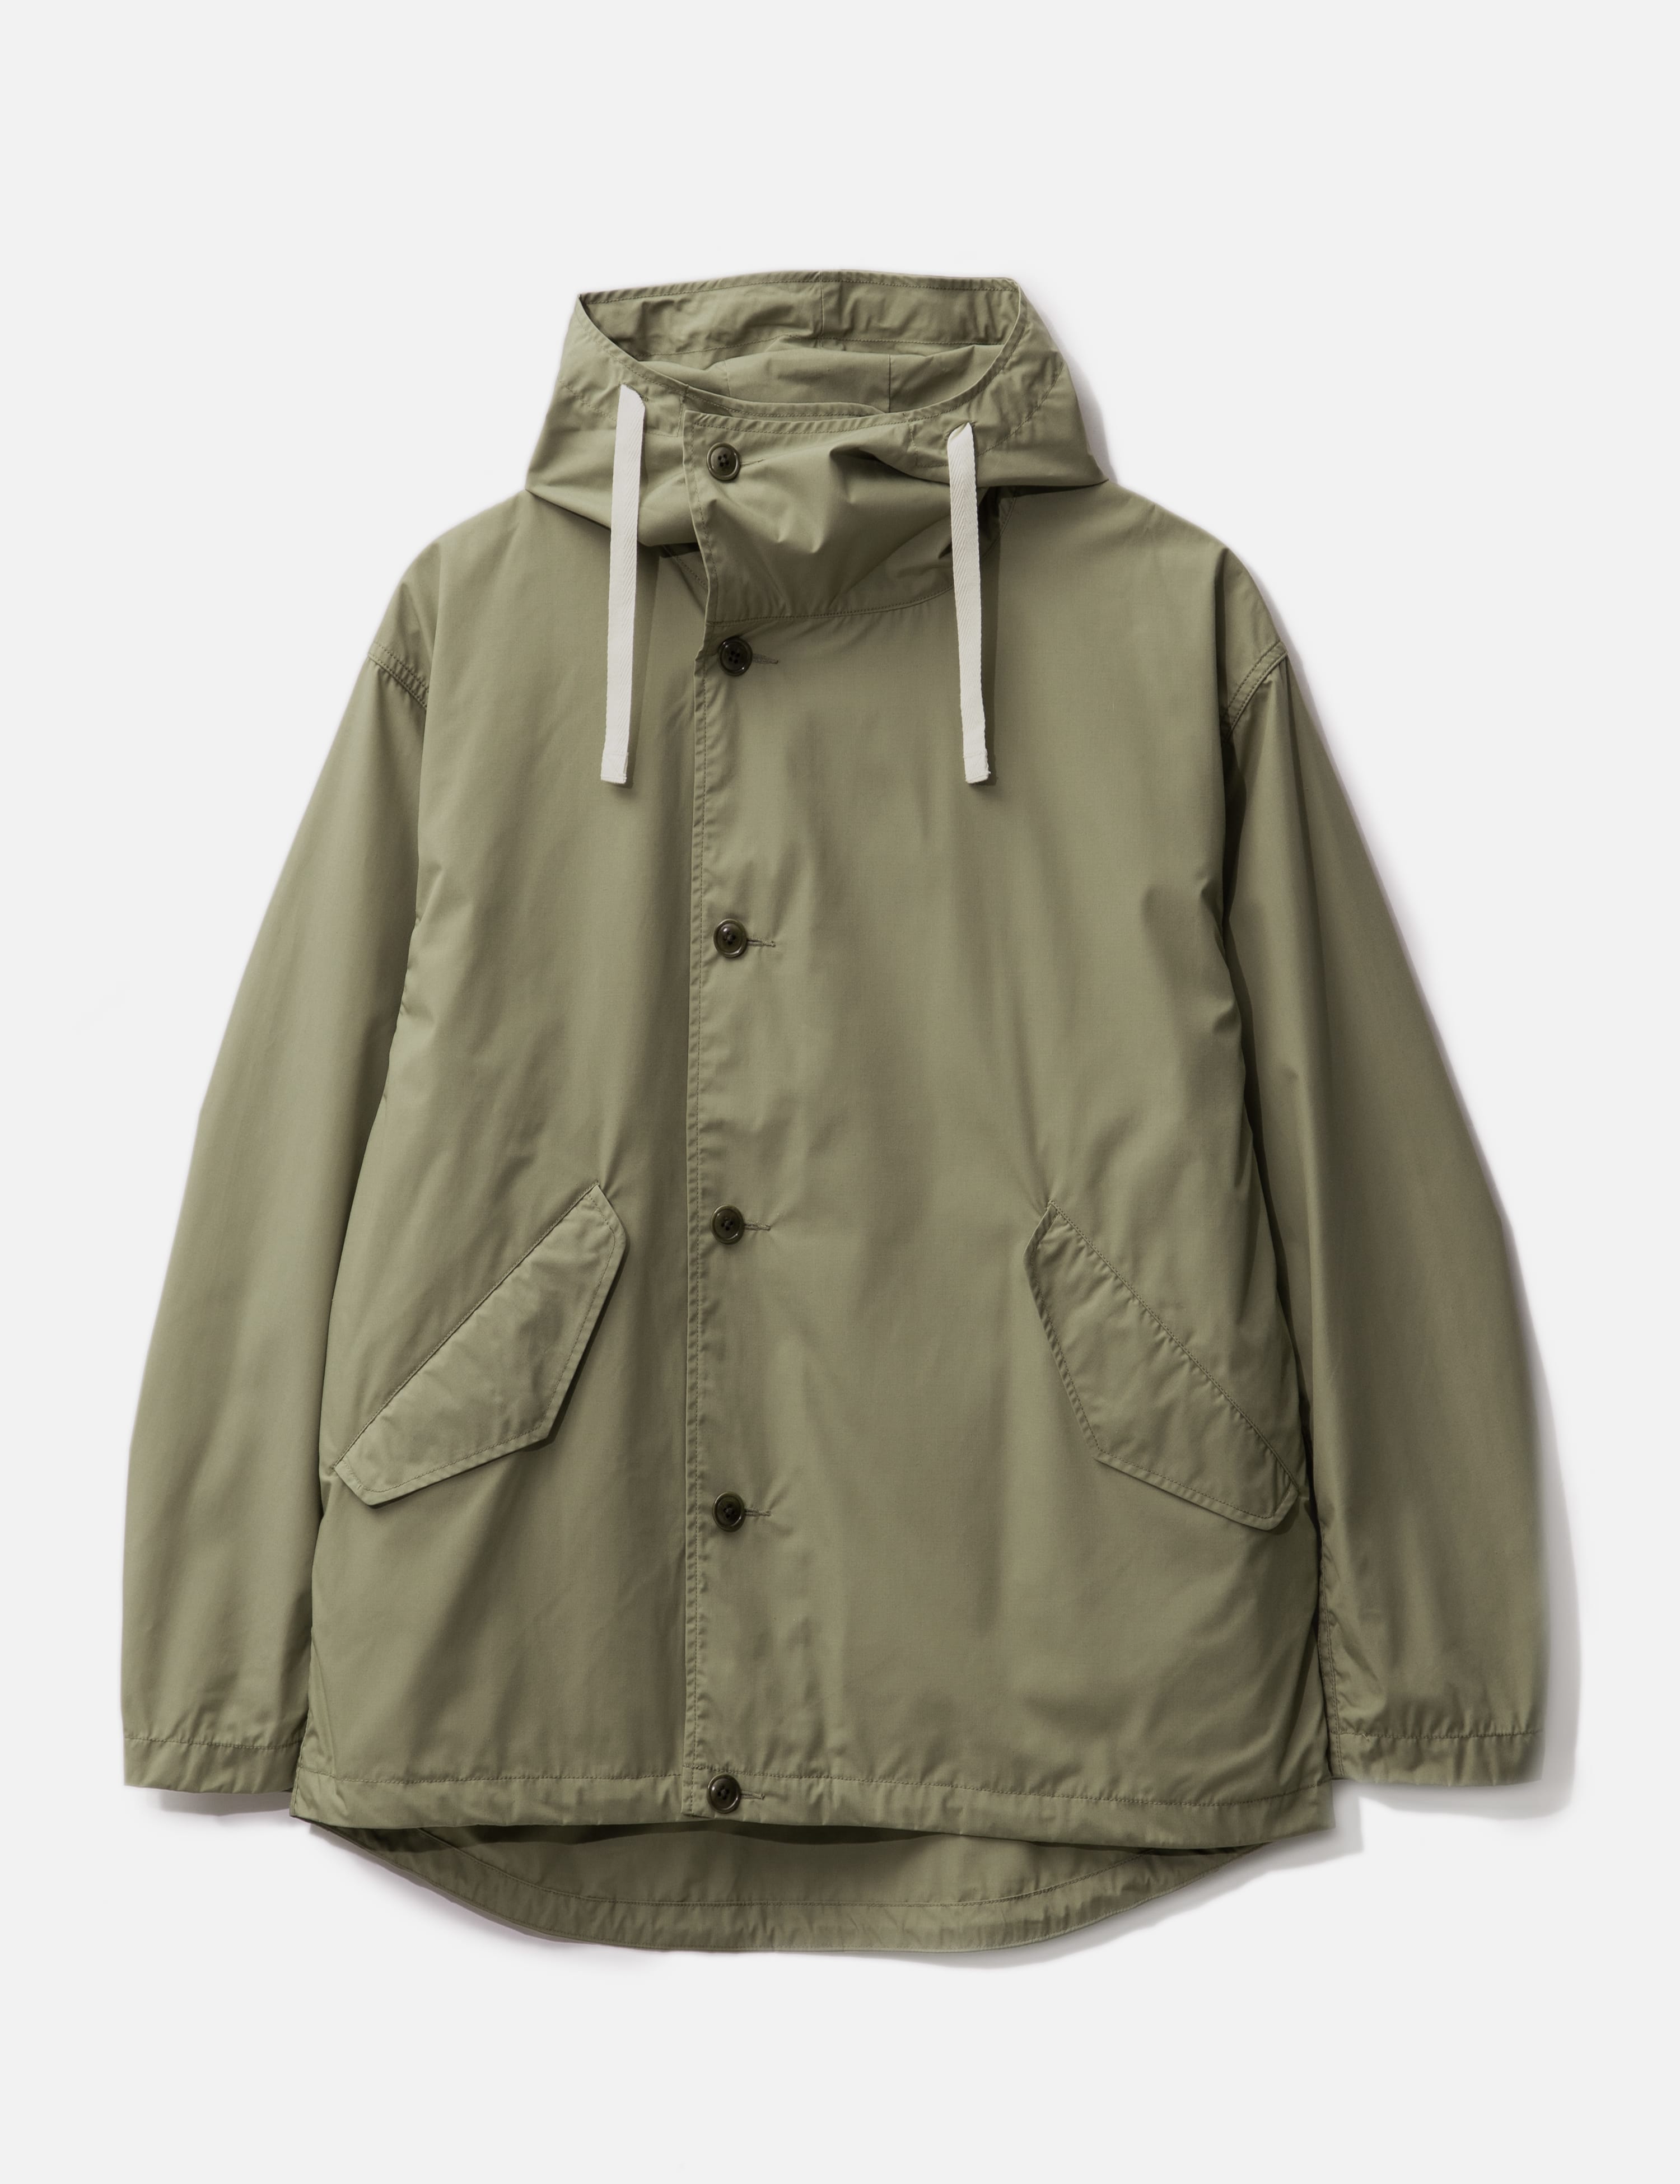 Nanamica - Hooded Jacket | HBX - Globally Curated Fashion and Lifestyle by  Hypebeast